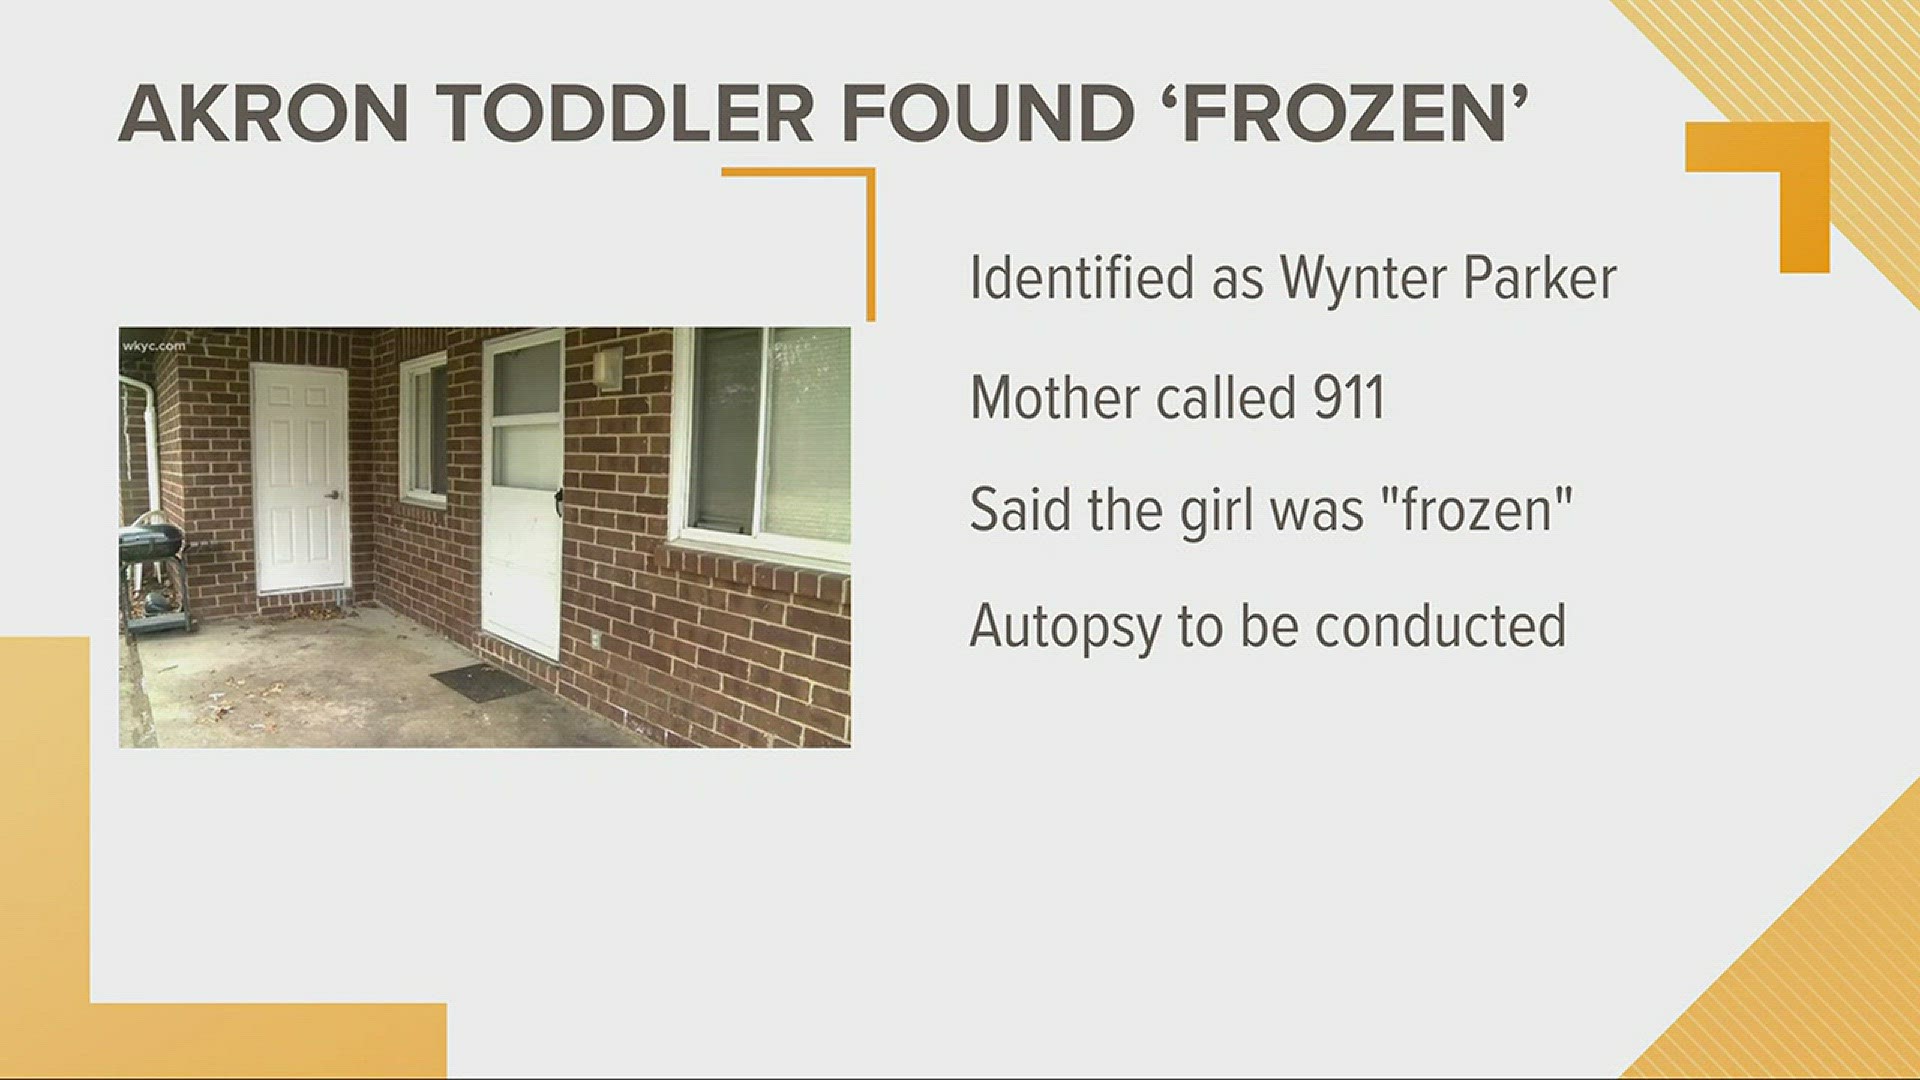 Feb. 5, 2018: The 2-year-old Akron girl who died after she was found outside in the cold has been identified as Wynter Parker. The mother frantically called 911 Friday saying her daughter was "frozen."